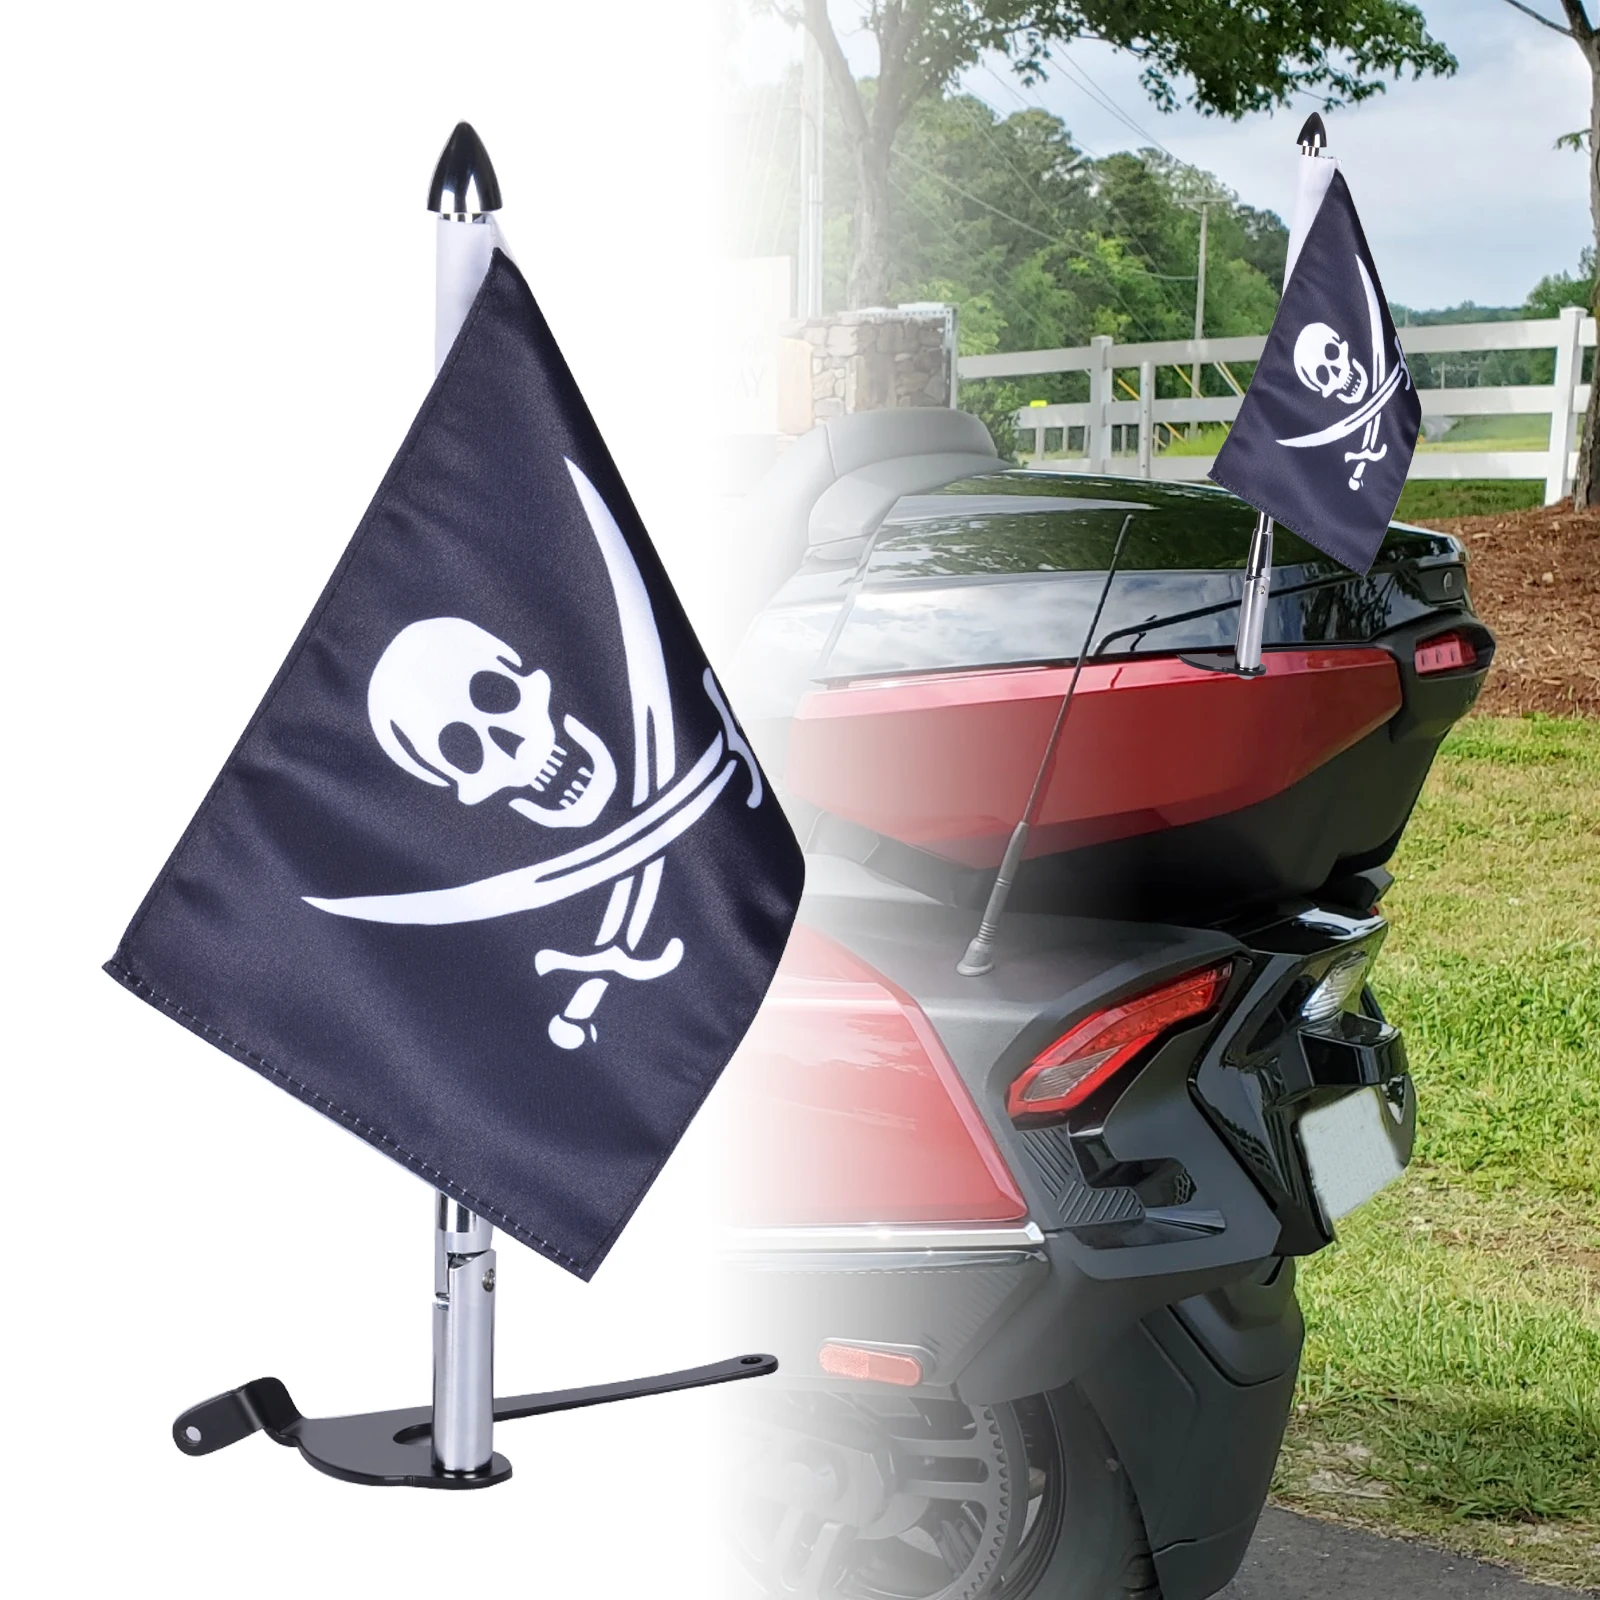 

For Spyder F3/RT Accessories Trunk Mounted Folding Flag Pole Kit with Mutiple Flags Fits for Can AM Spyder RT 2020+, F3 LTD 2017